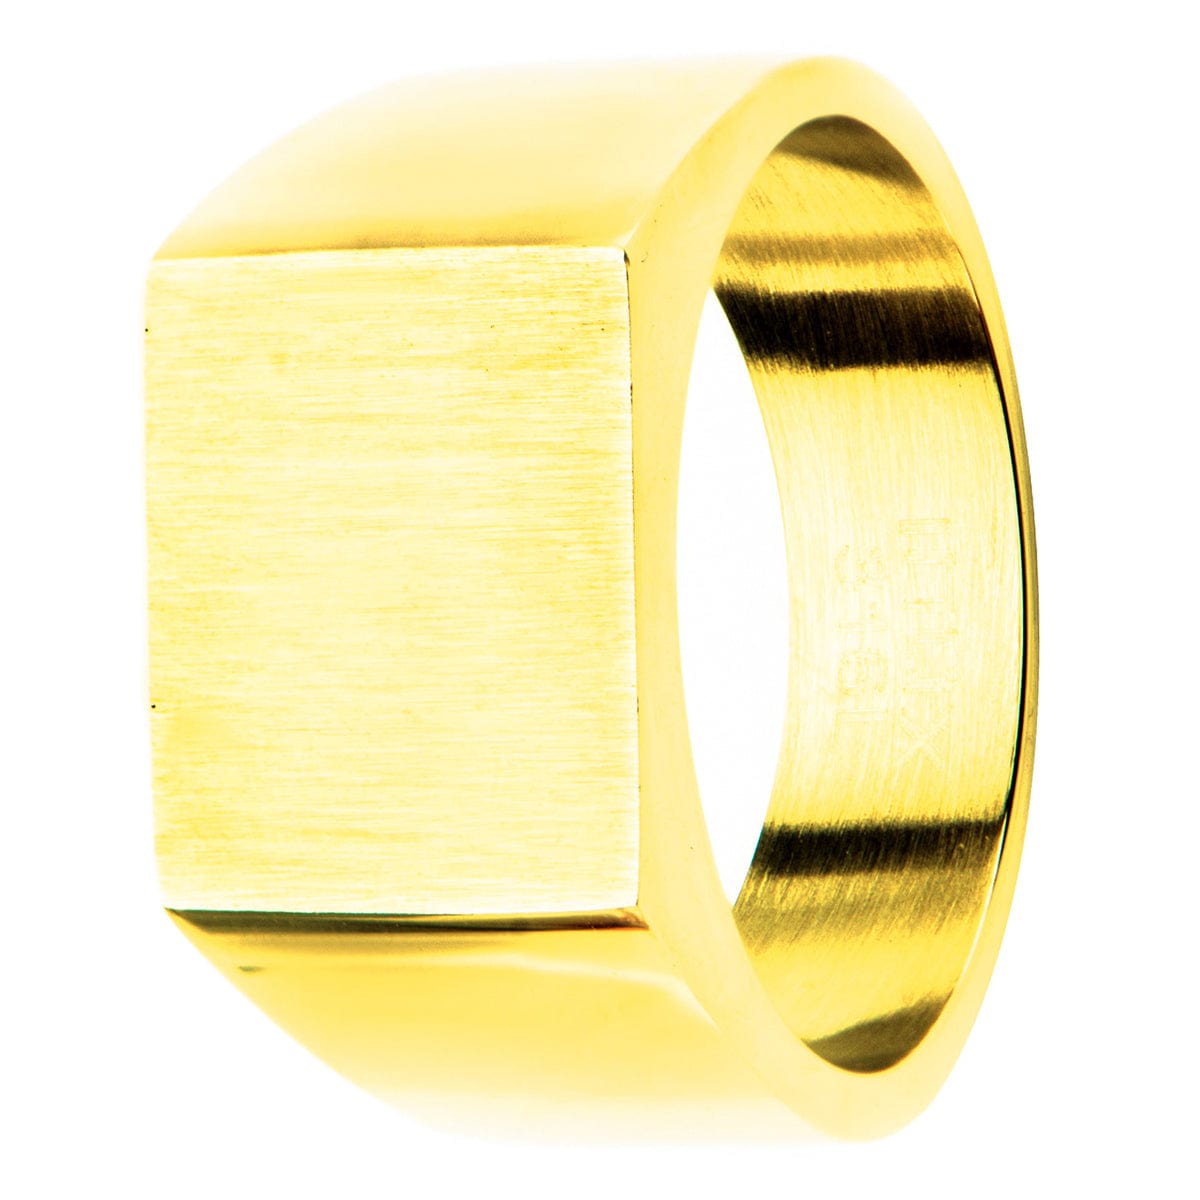 INOX JEWELRY Rings Golden Tone Stainless Steel Polished Signet Engravable Ring